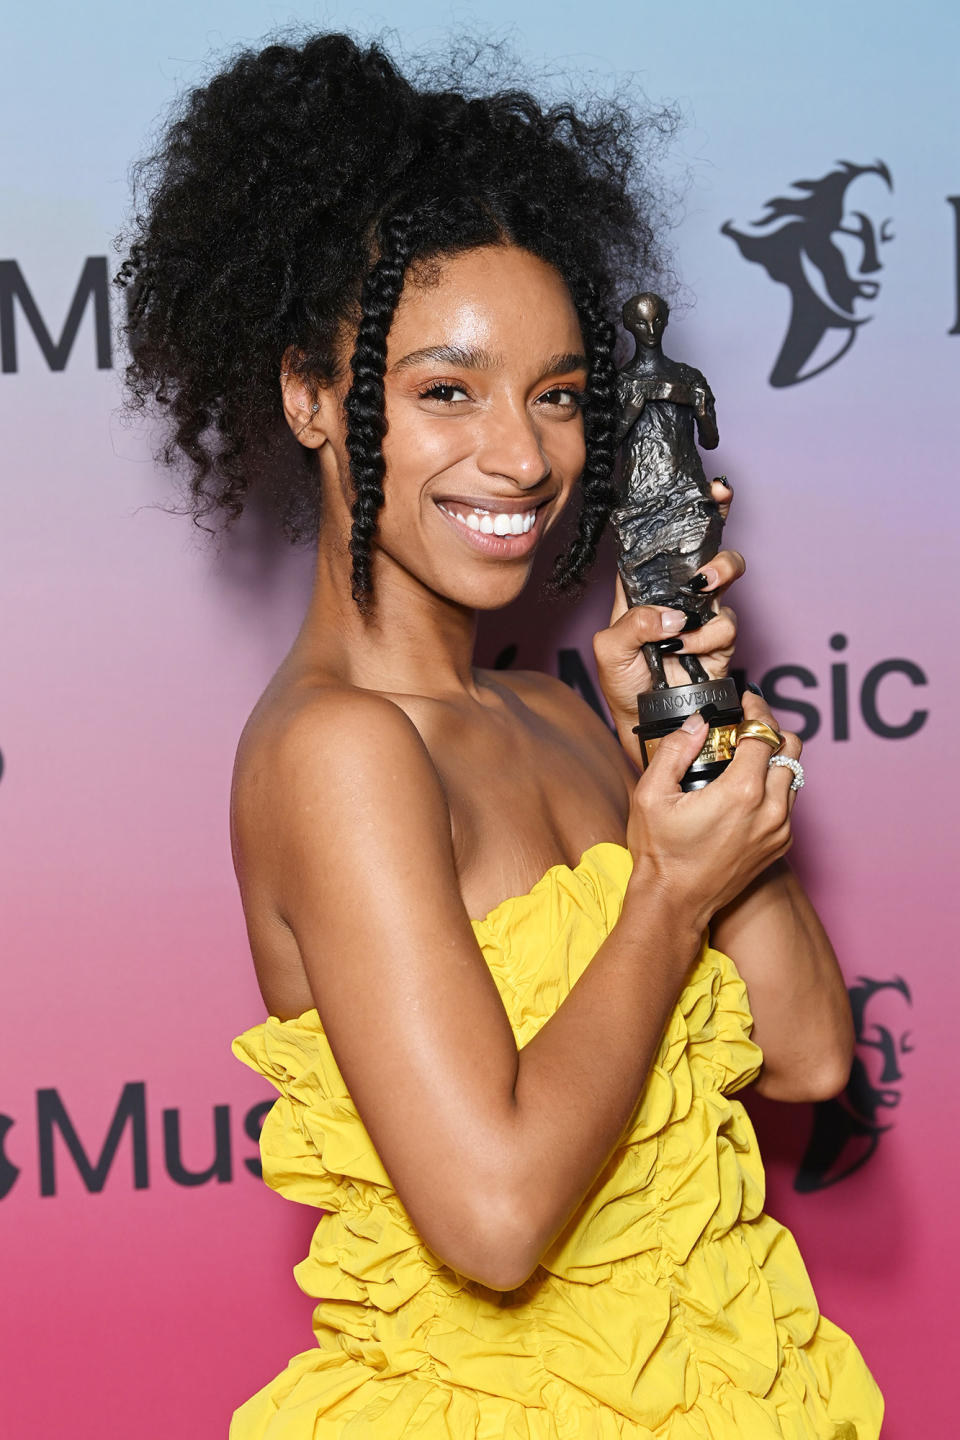 <p>Lianne La Havas proudly shows off her award for best album on Sept. 21 at the Ivor Novello Awards in London. </p>